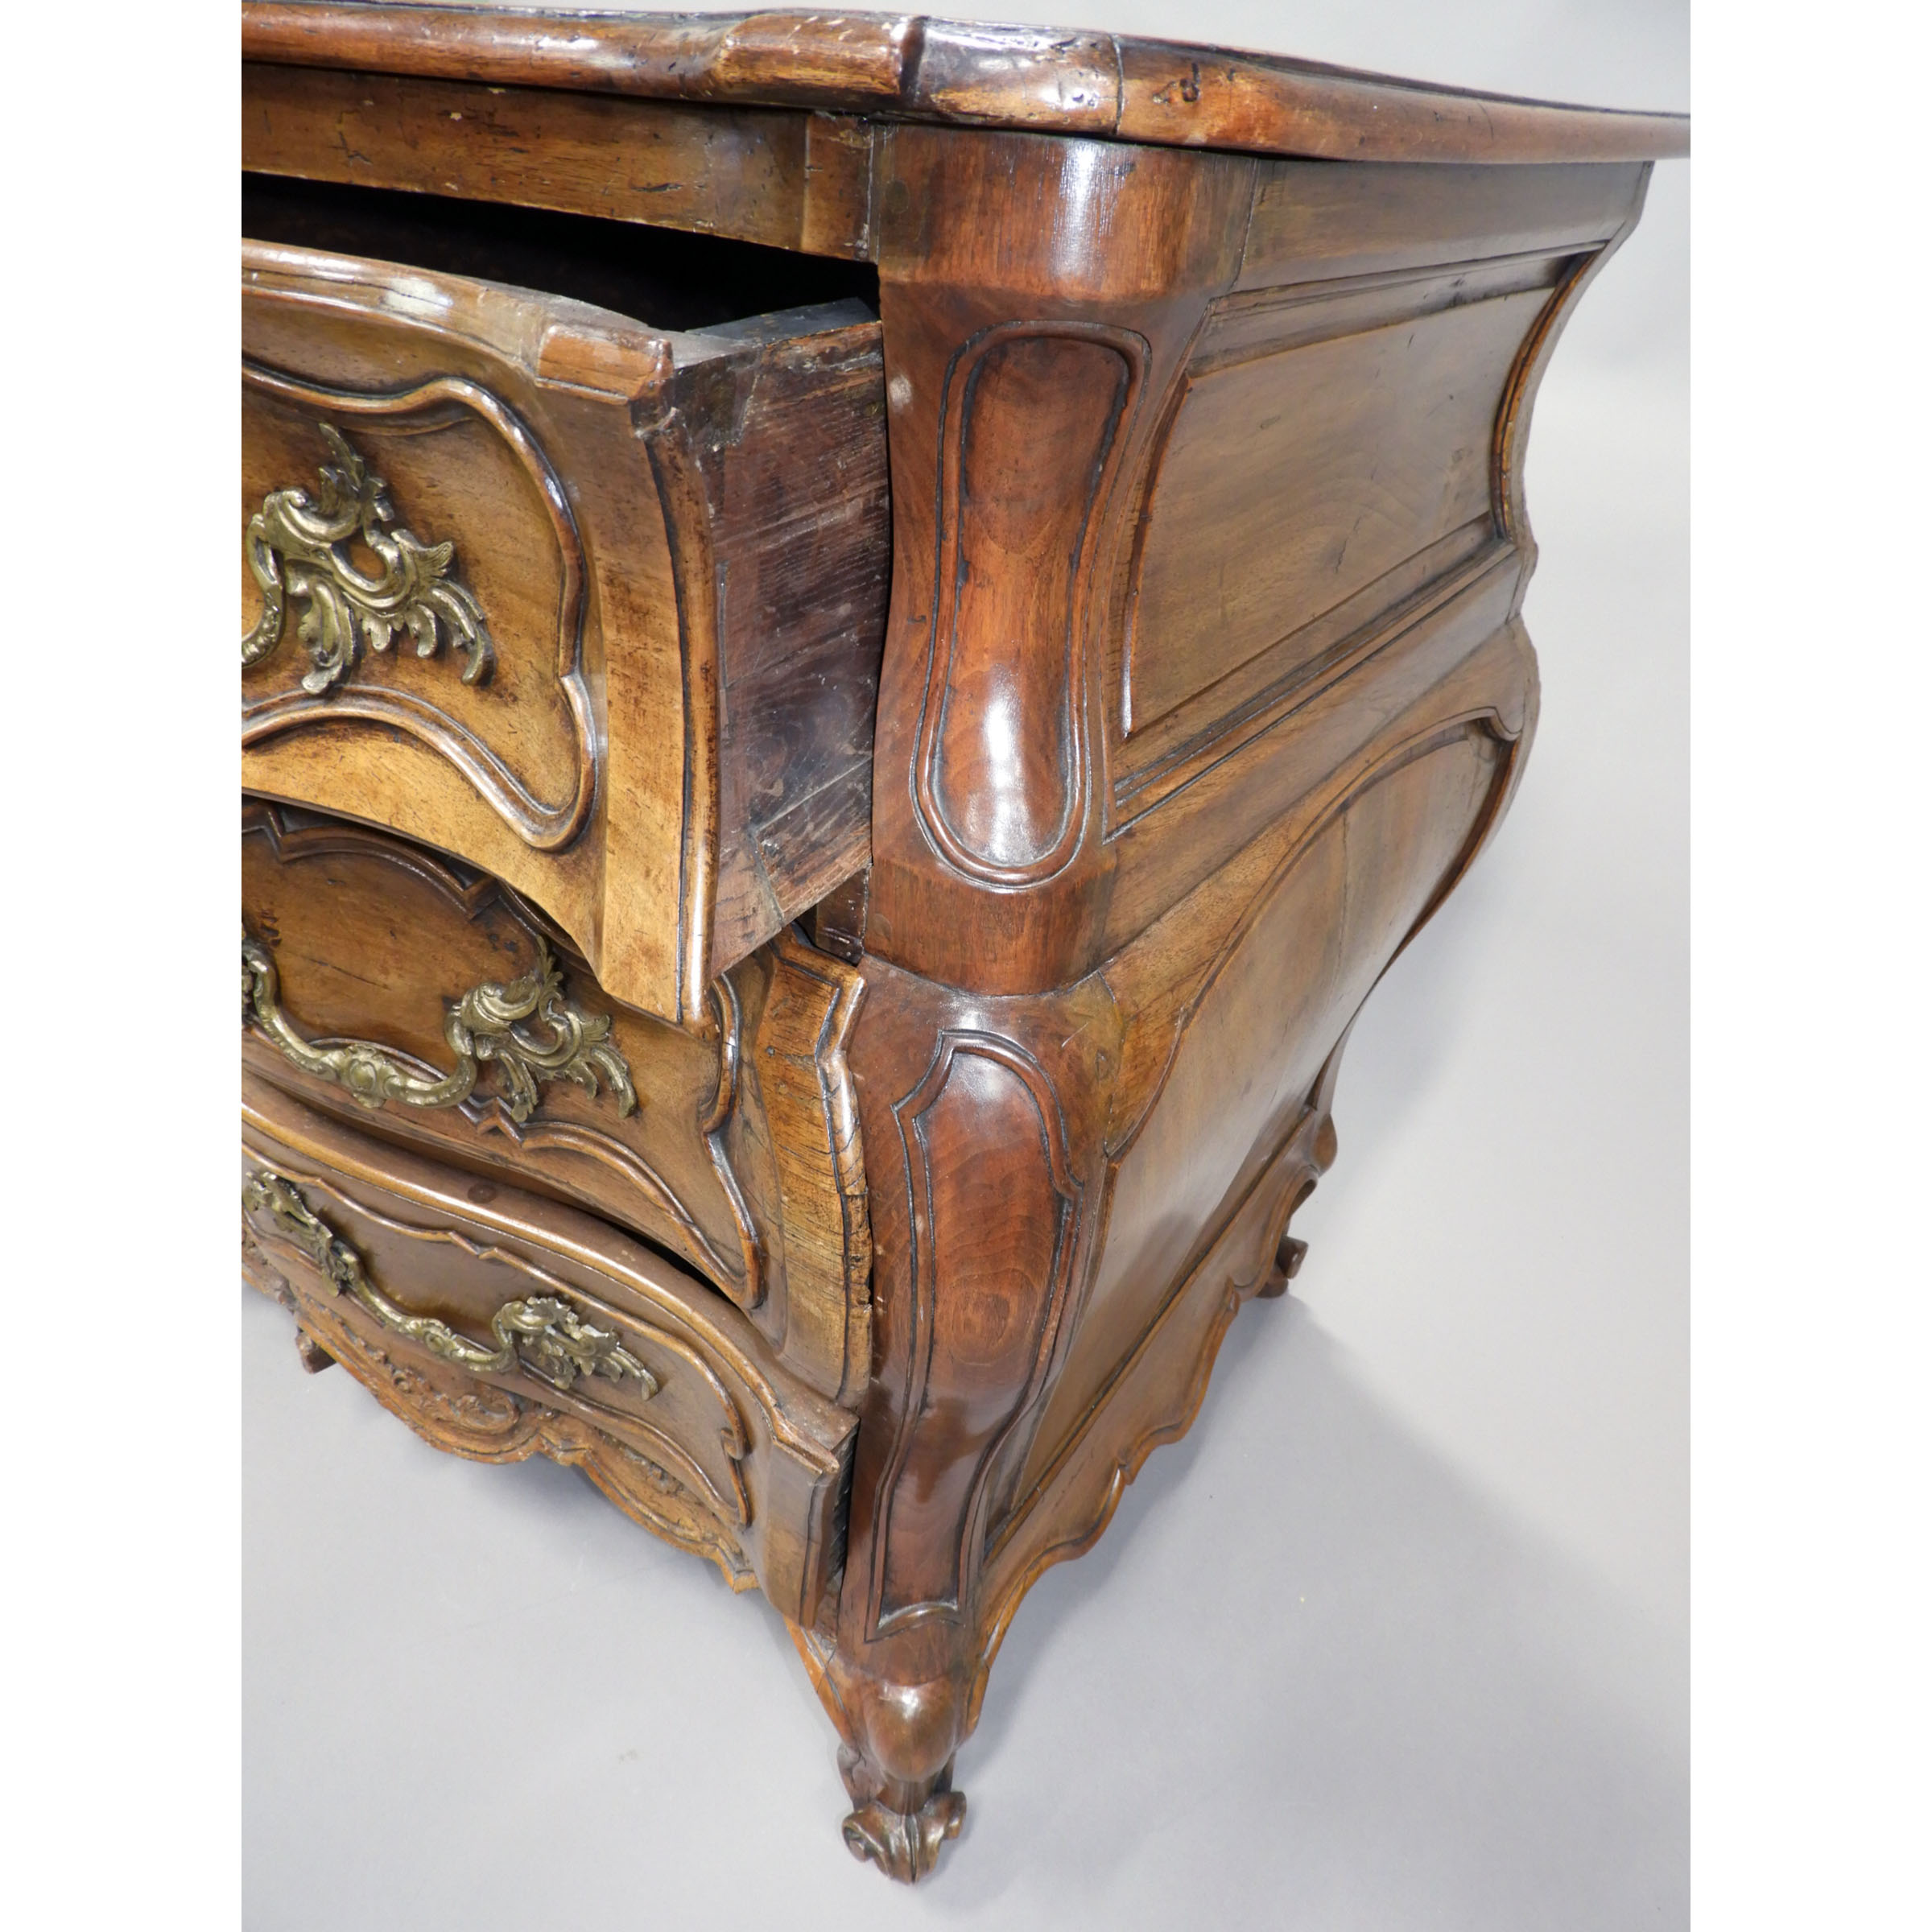 French Carved Walnut Commode, mid 18th century